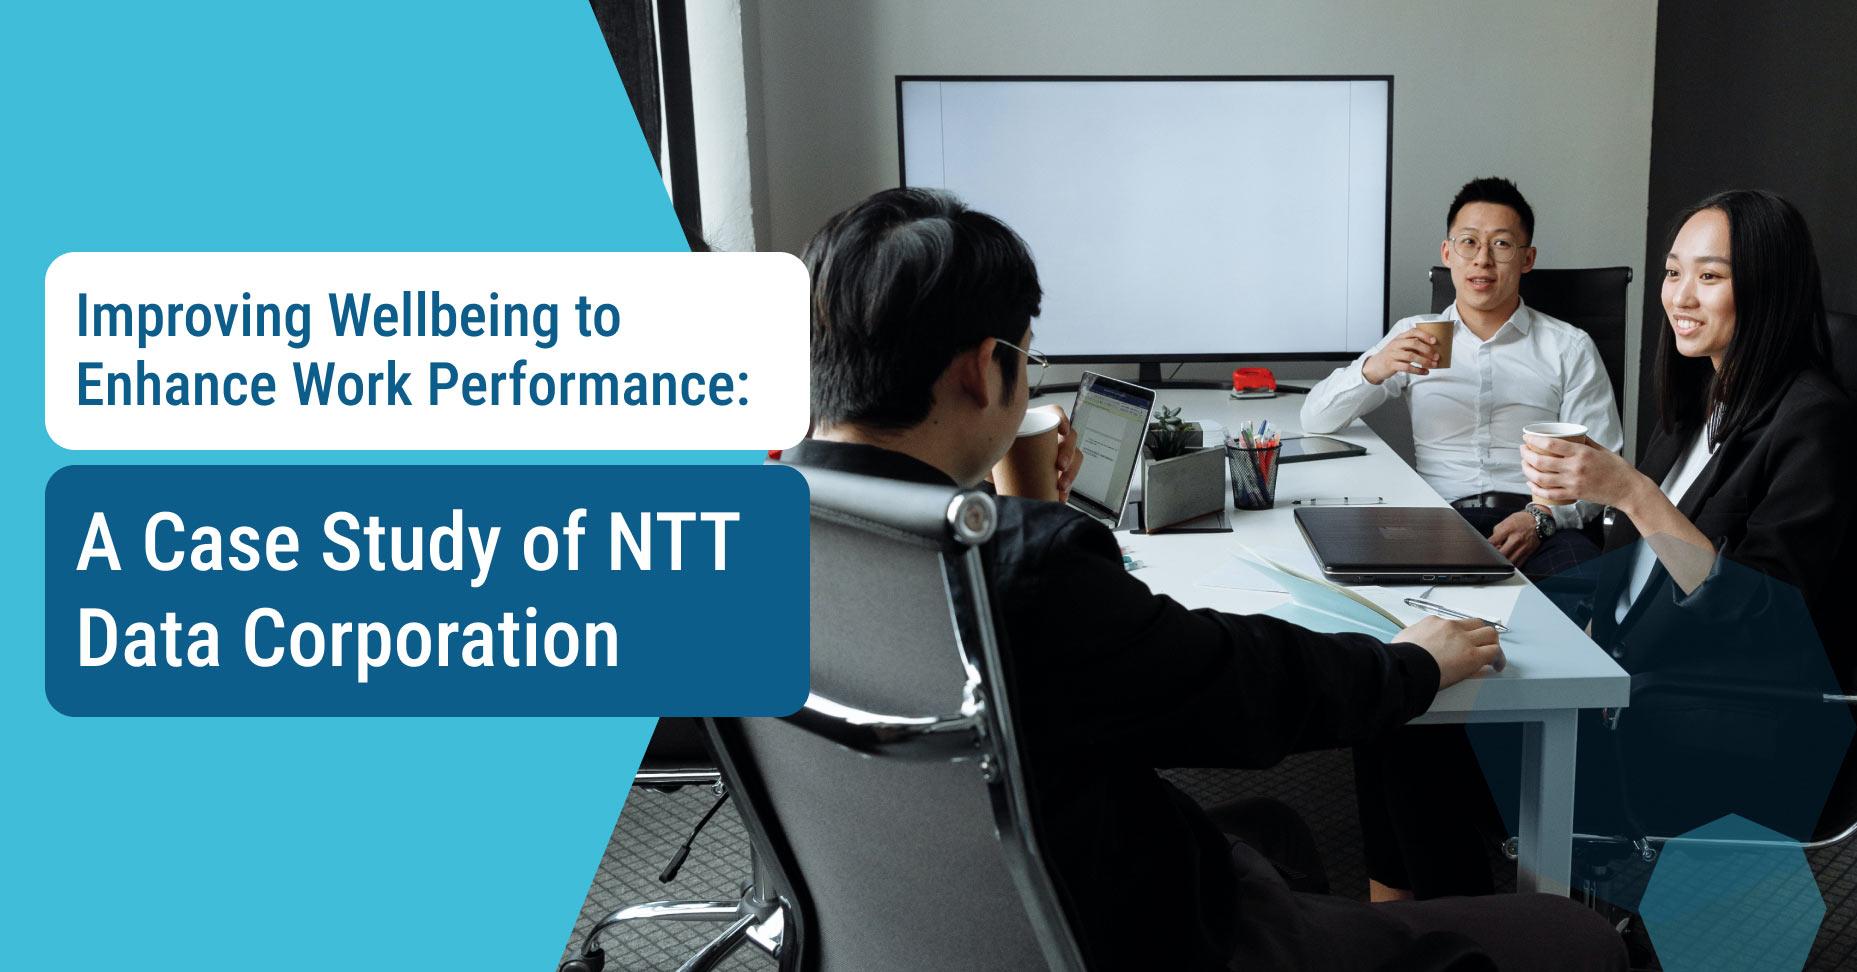 Improving wellbeing to enhance work performance: A Case Study of NTT Data Corporation